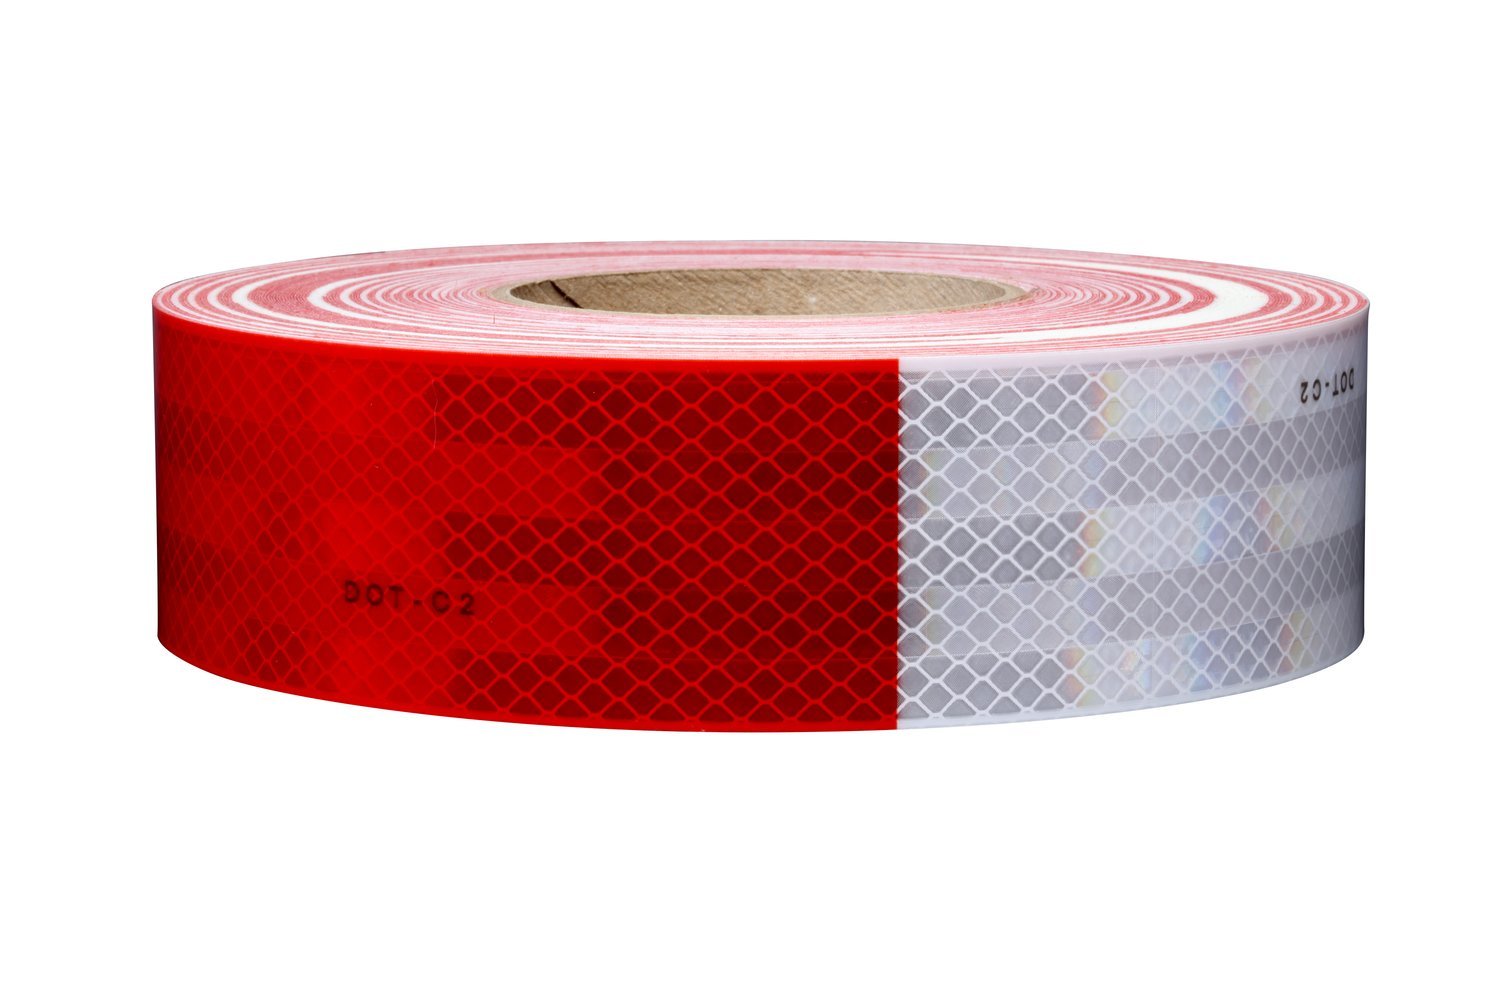 7010388926 - 3M Diamond Grade Conspicuity Markings 983-32, Red/White, DOT, 2 in x
51 ft, Kiss-cut every 18 in